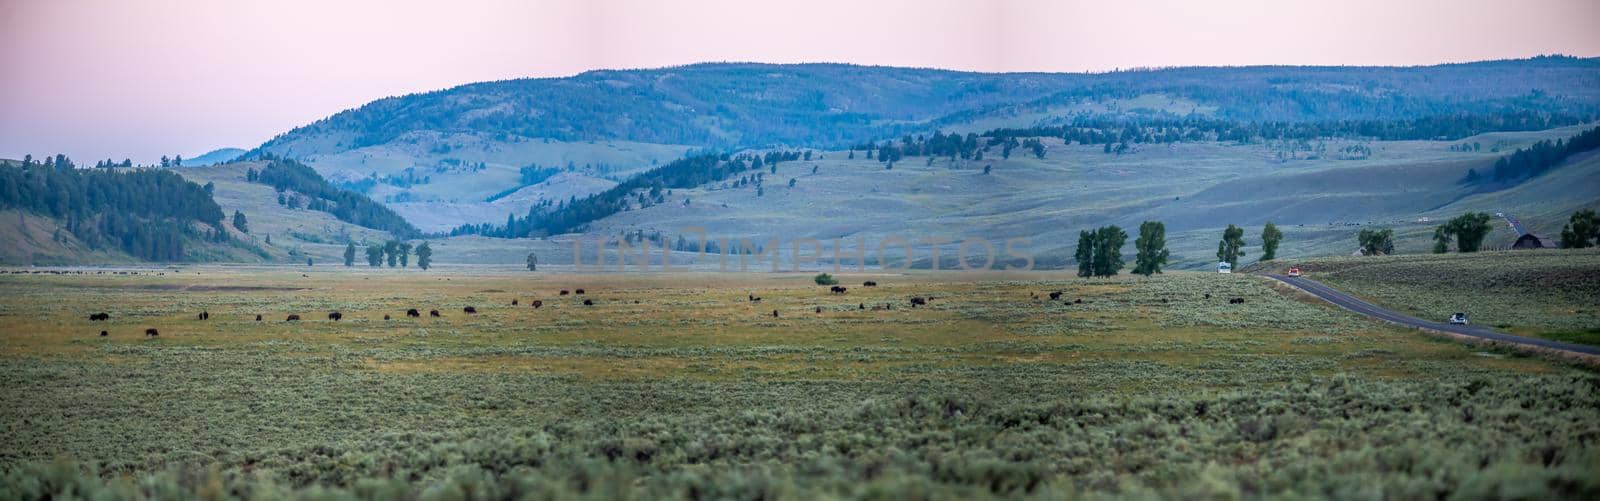 The sun setting over the Lamar Valley near the northeast entrance of Yellowstone National Park in Wyoming. by digidreamgrafix